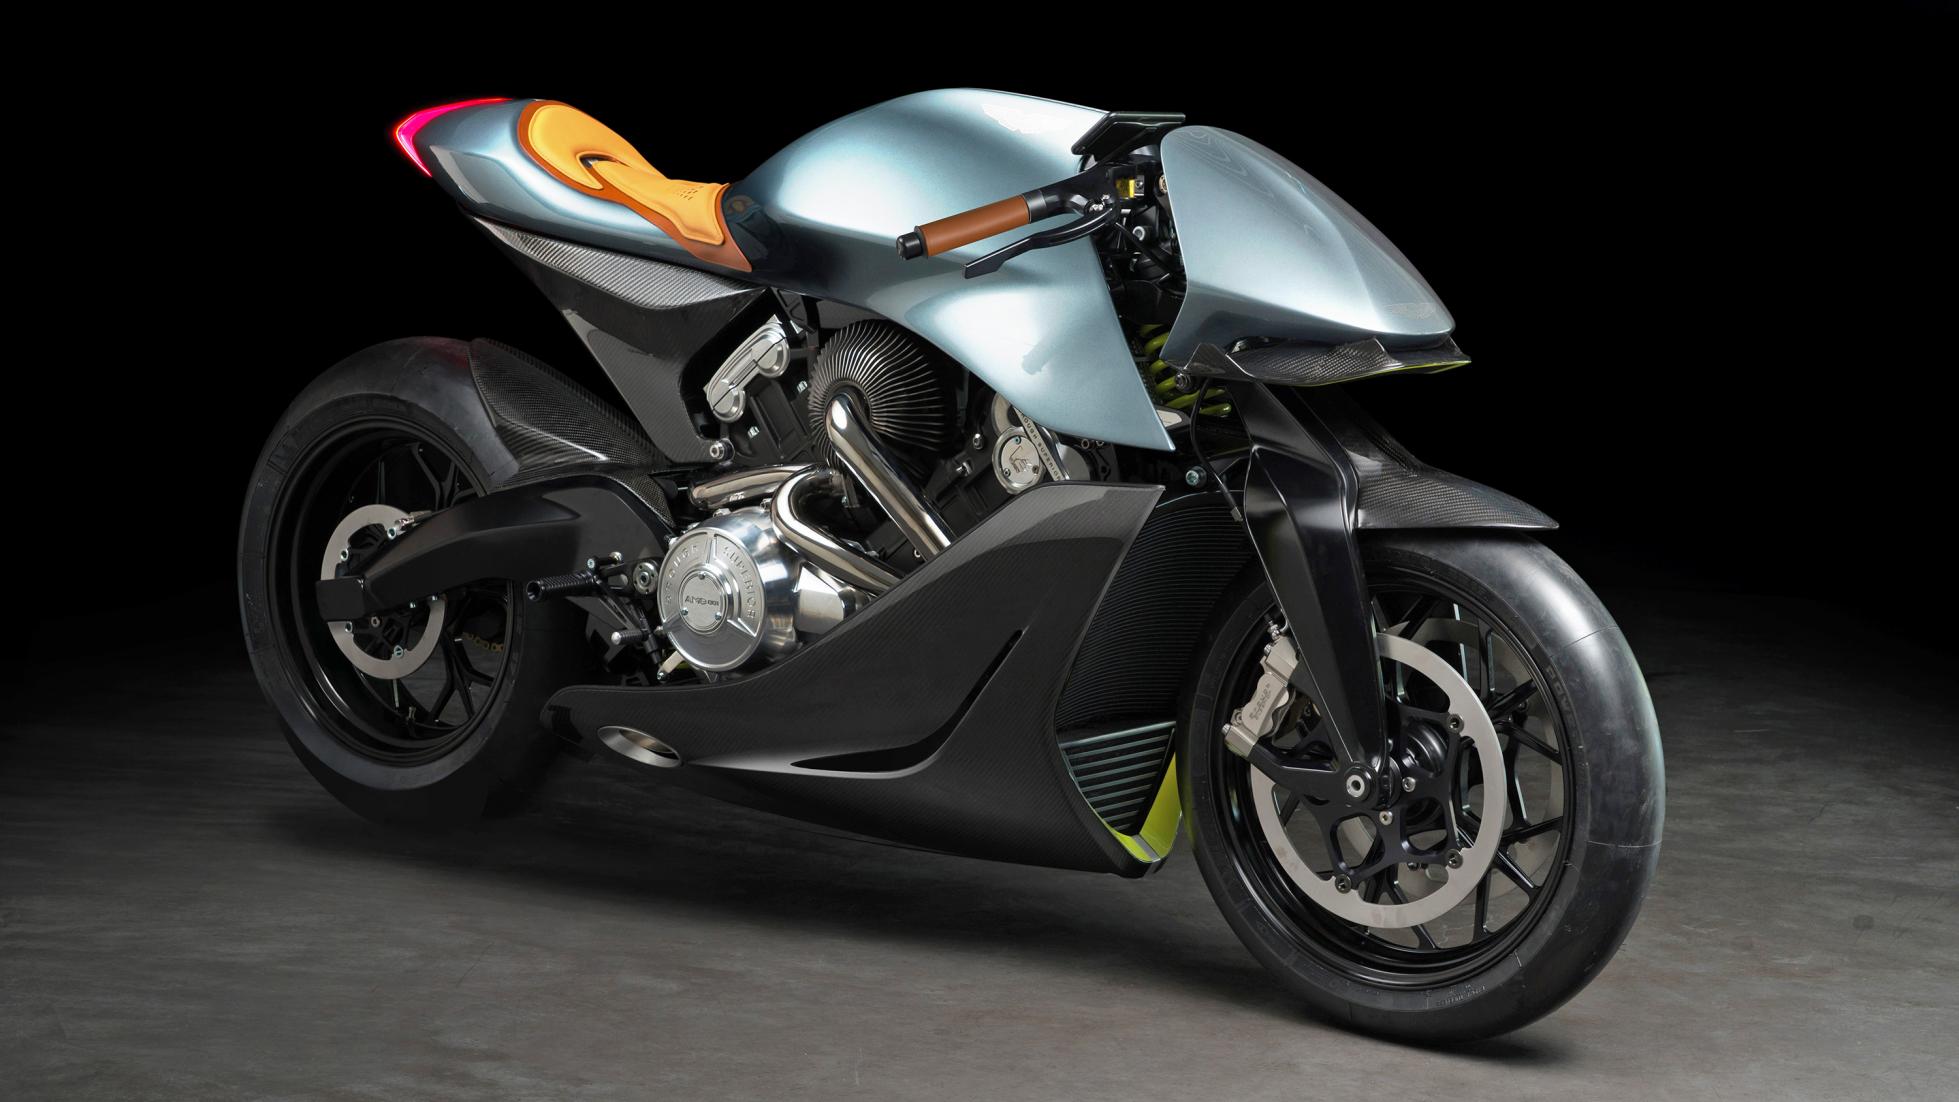 Of course Aston Martin's made a £95k (approx. RM506,000) bike